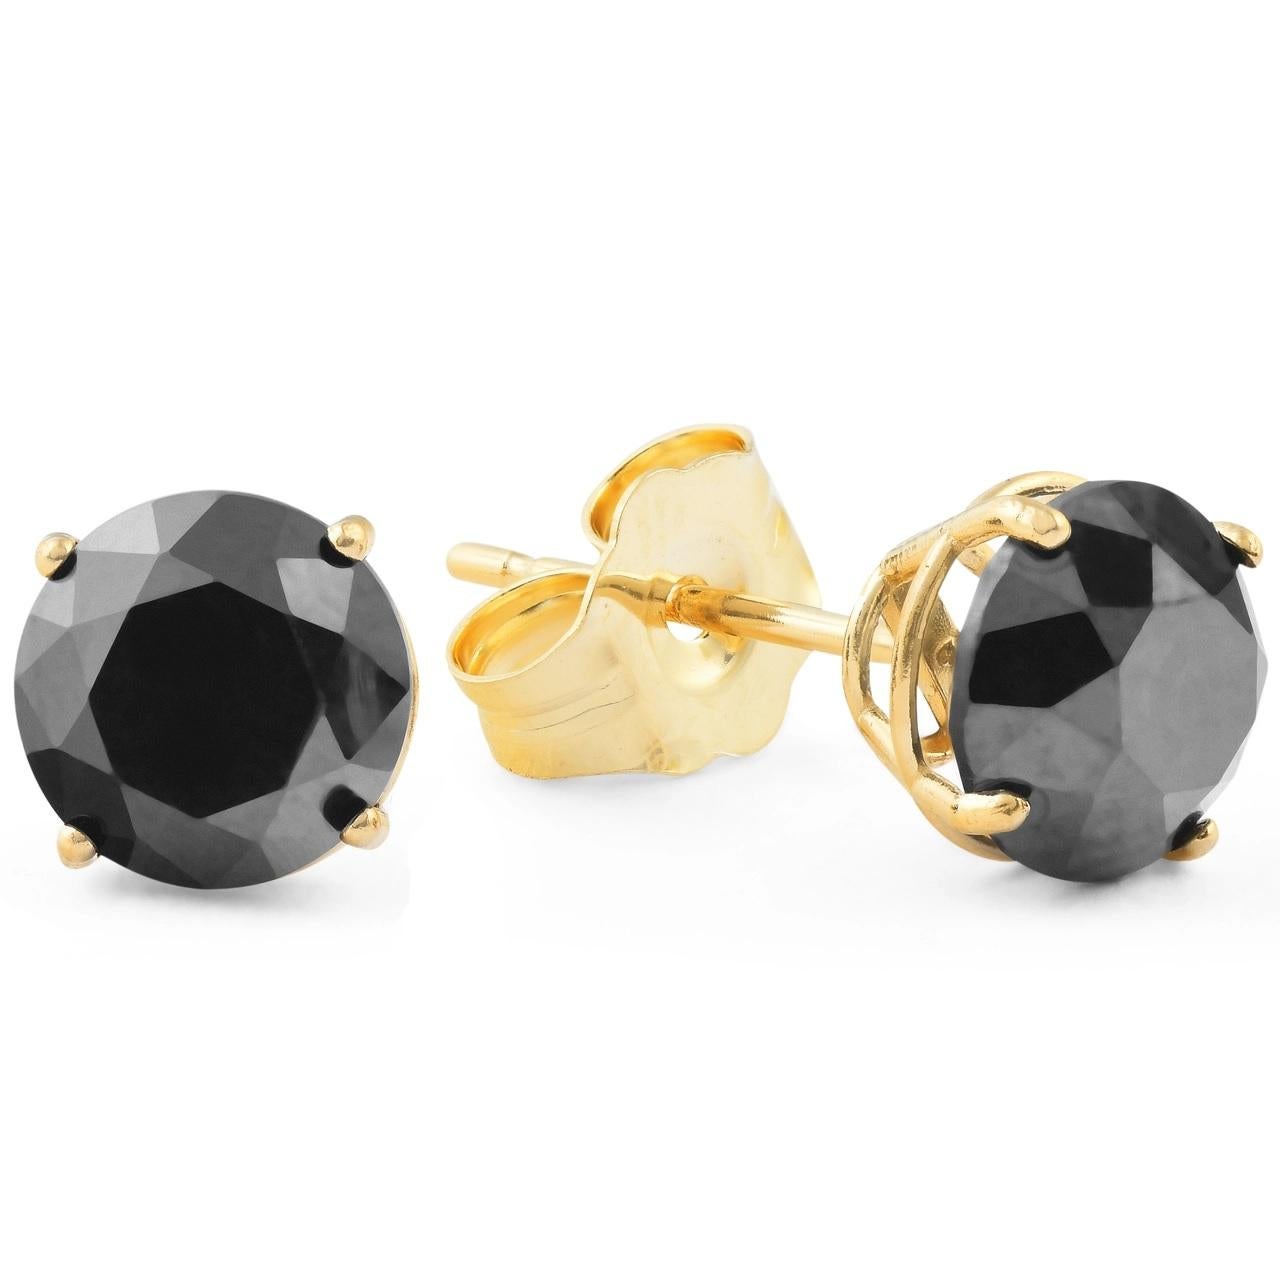 Make a daring statement with these spectacular diamond solitaire earrings. Crafted in 14K yellow gold, each earring showcases an alluring 4.2 mm mm natural round black diamond of in a four-prong setting. Impressive with 0.75 carat total weight of